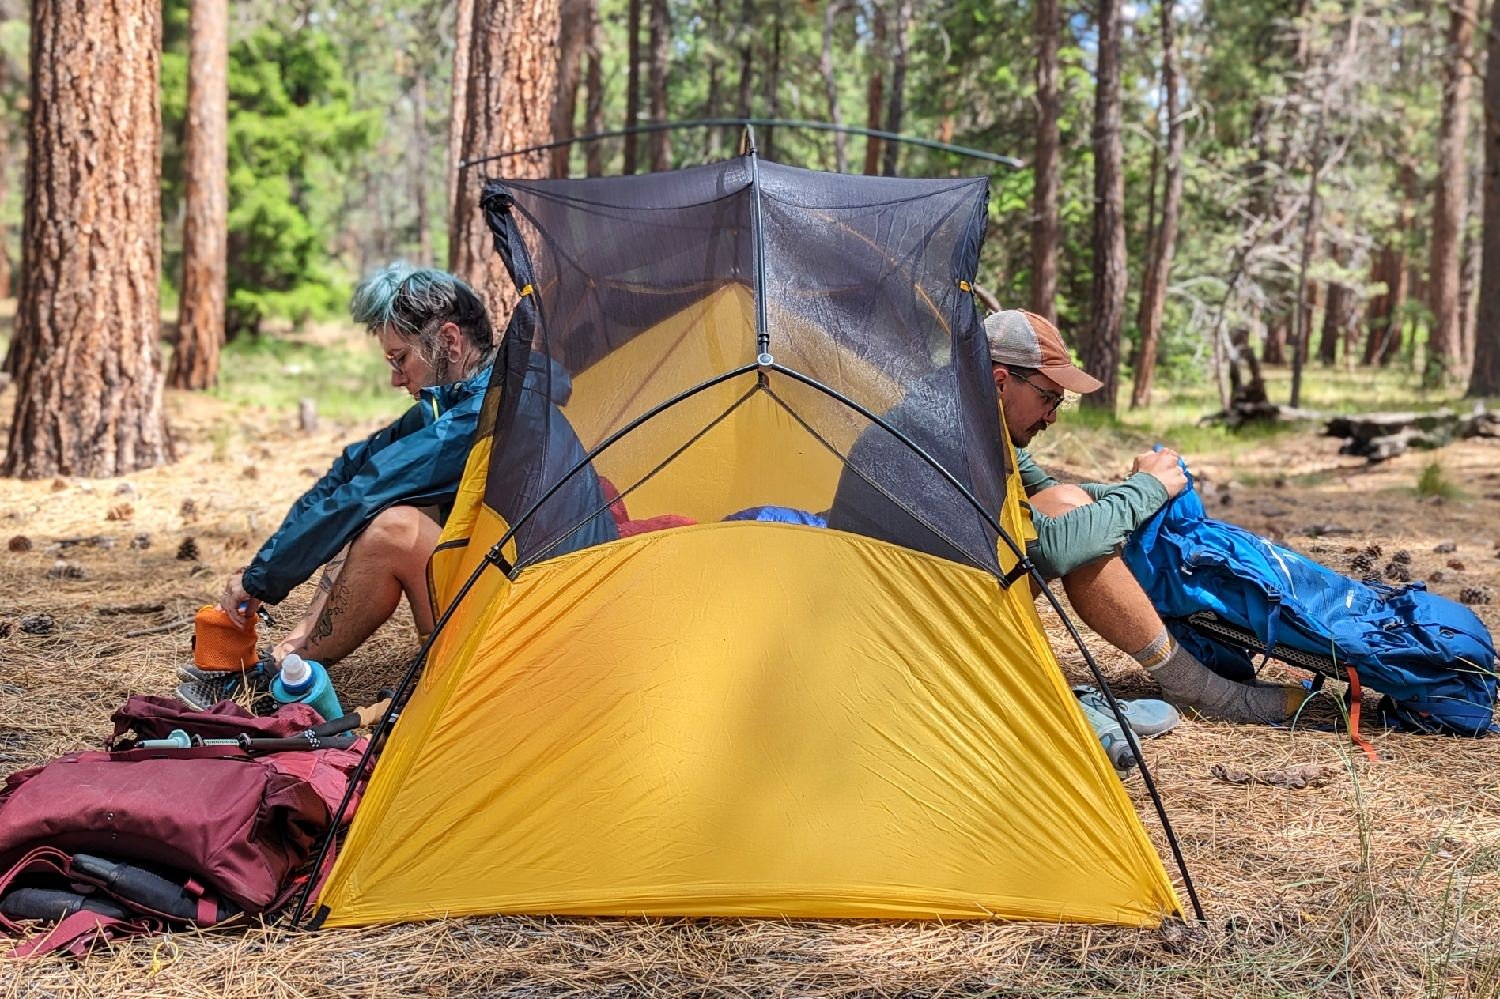 An outside view of the REI Flash 2 Tent from the foot of the tent - two hikers are sitting inside with their legs out either door - one is interacting with a backpack and the other has a cookset in their hands